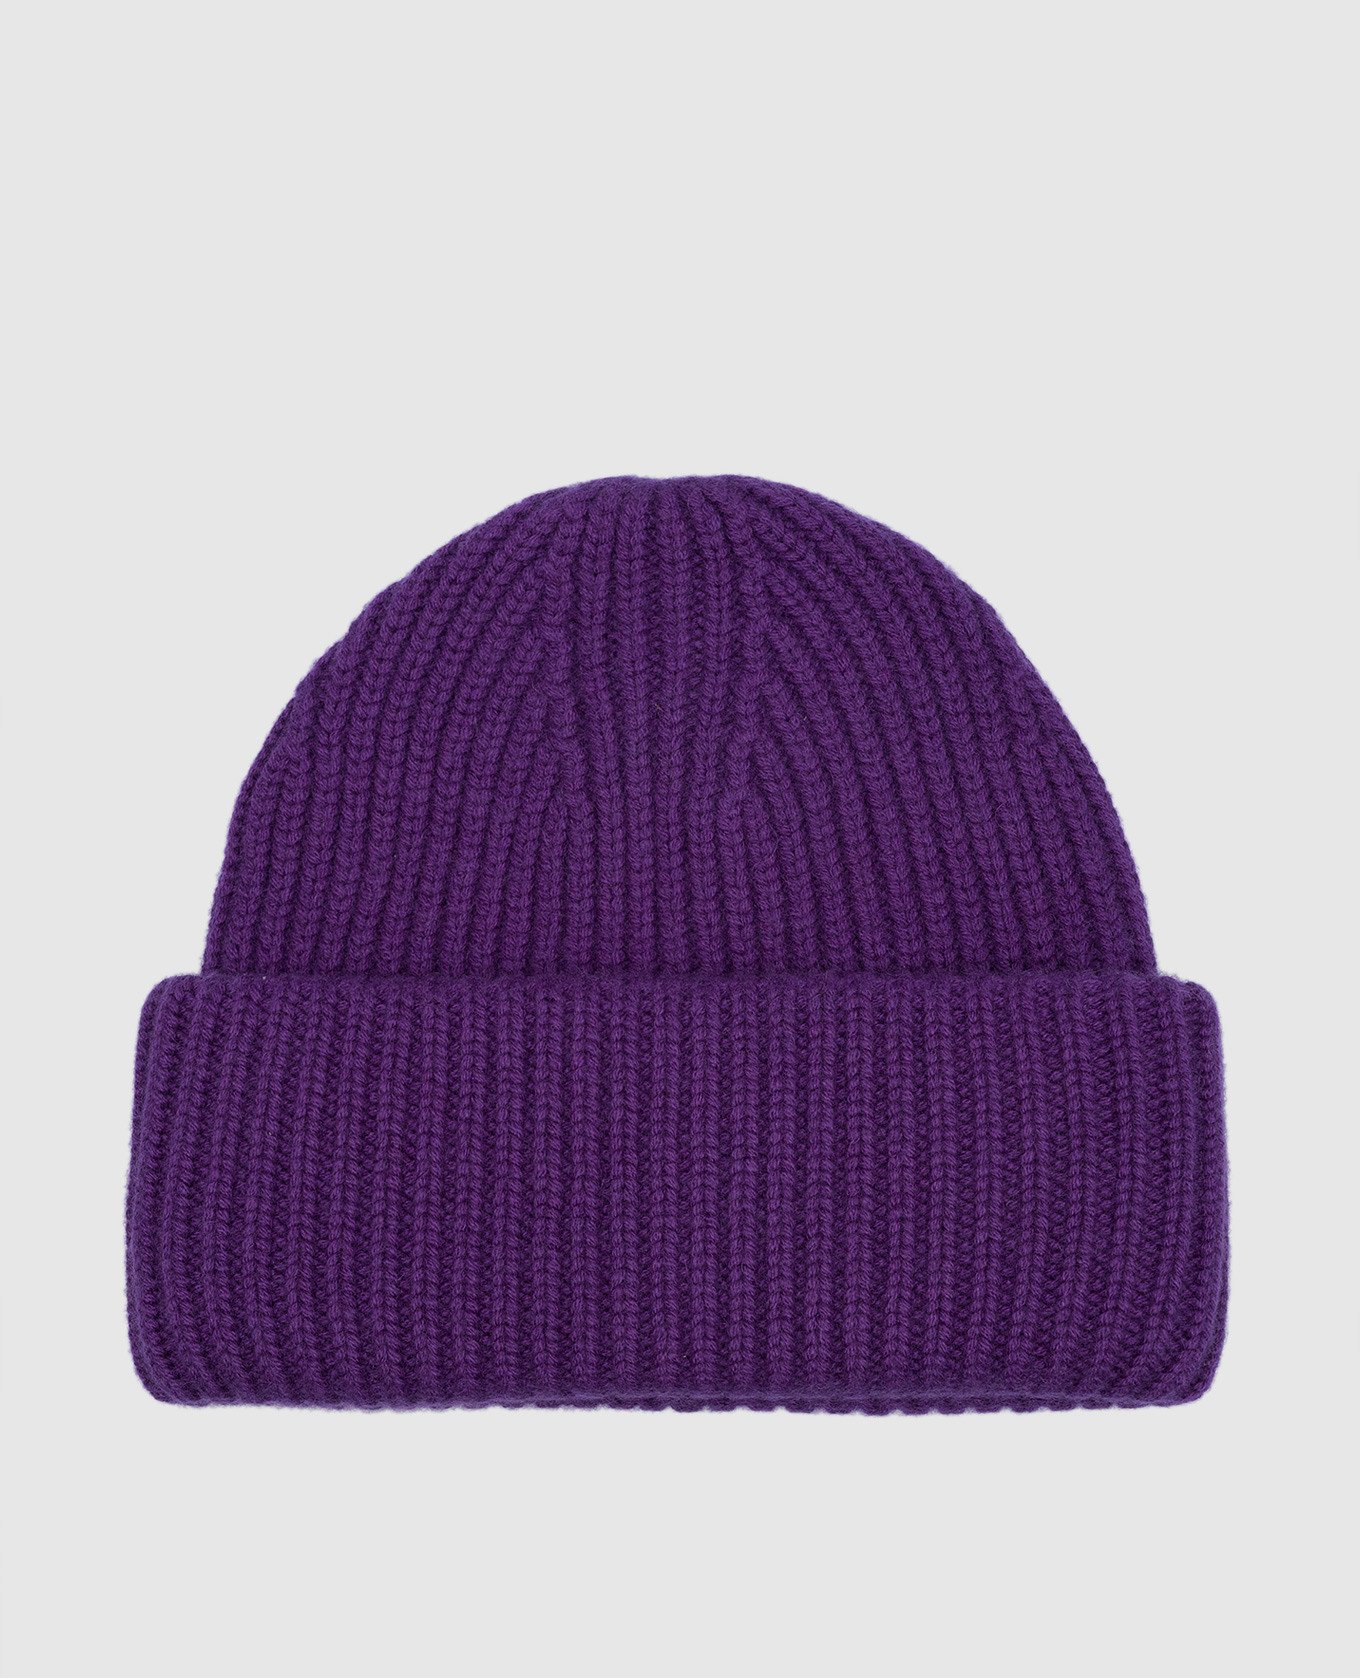 Purple hat made of wool and cashmere